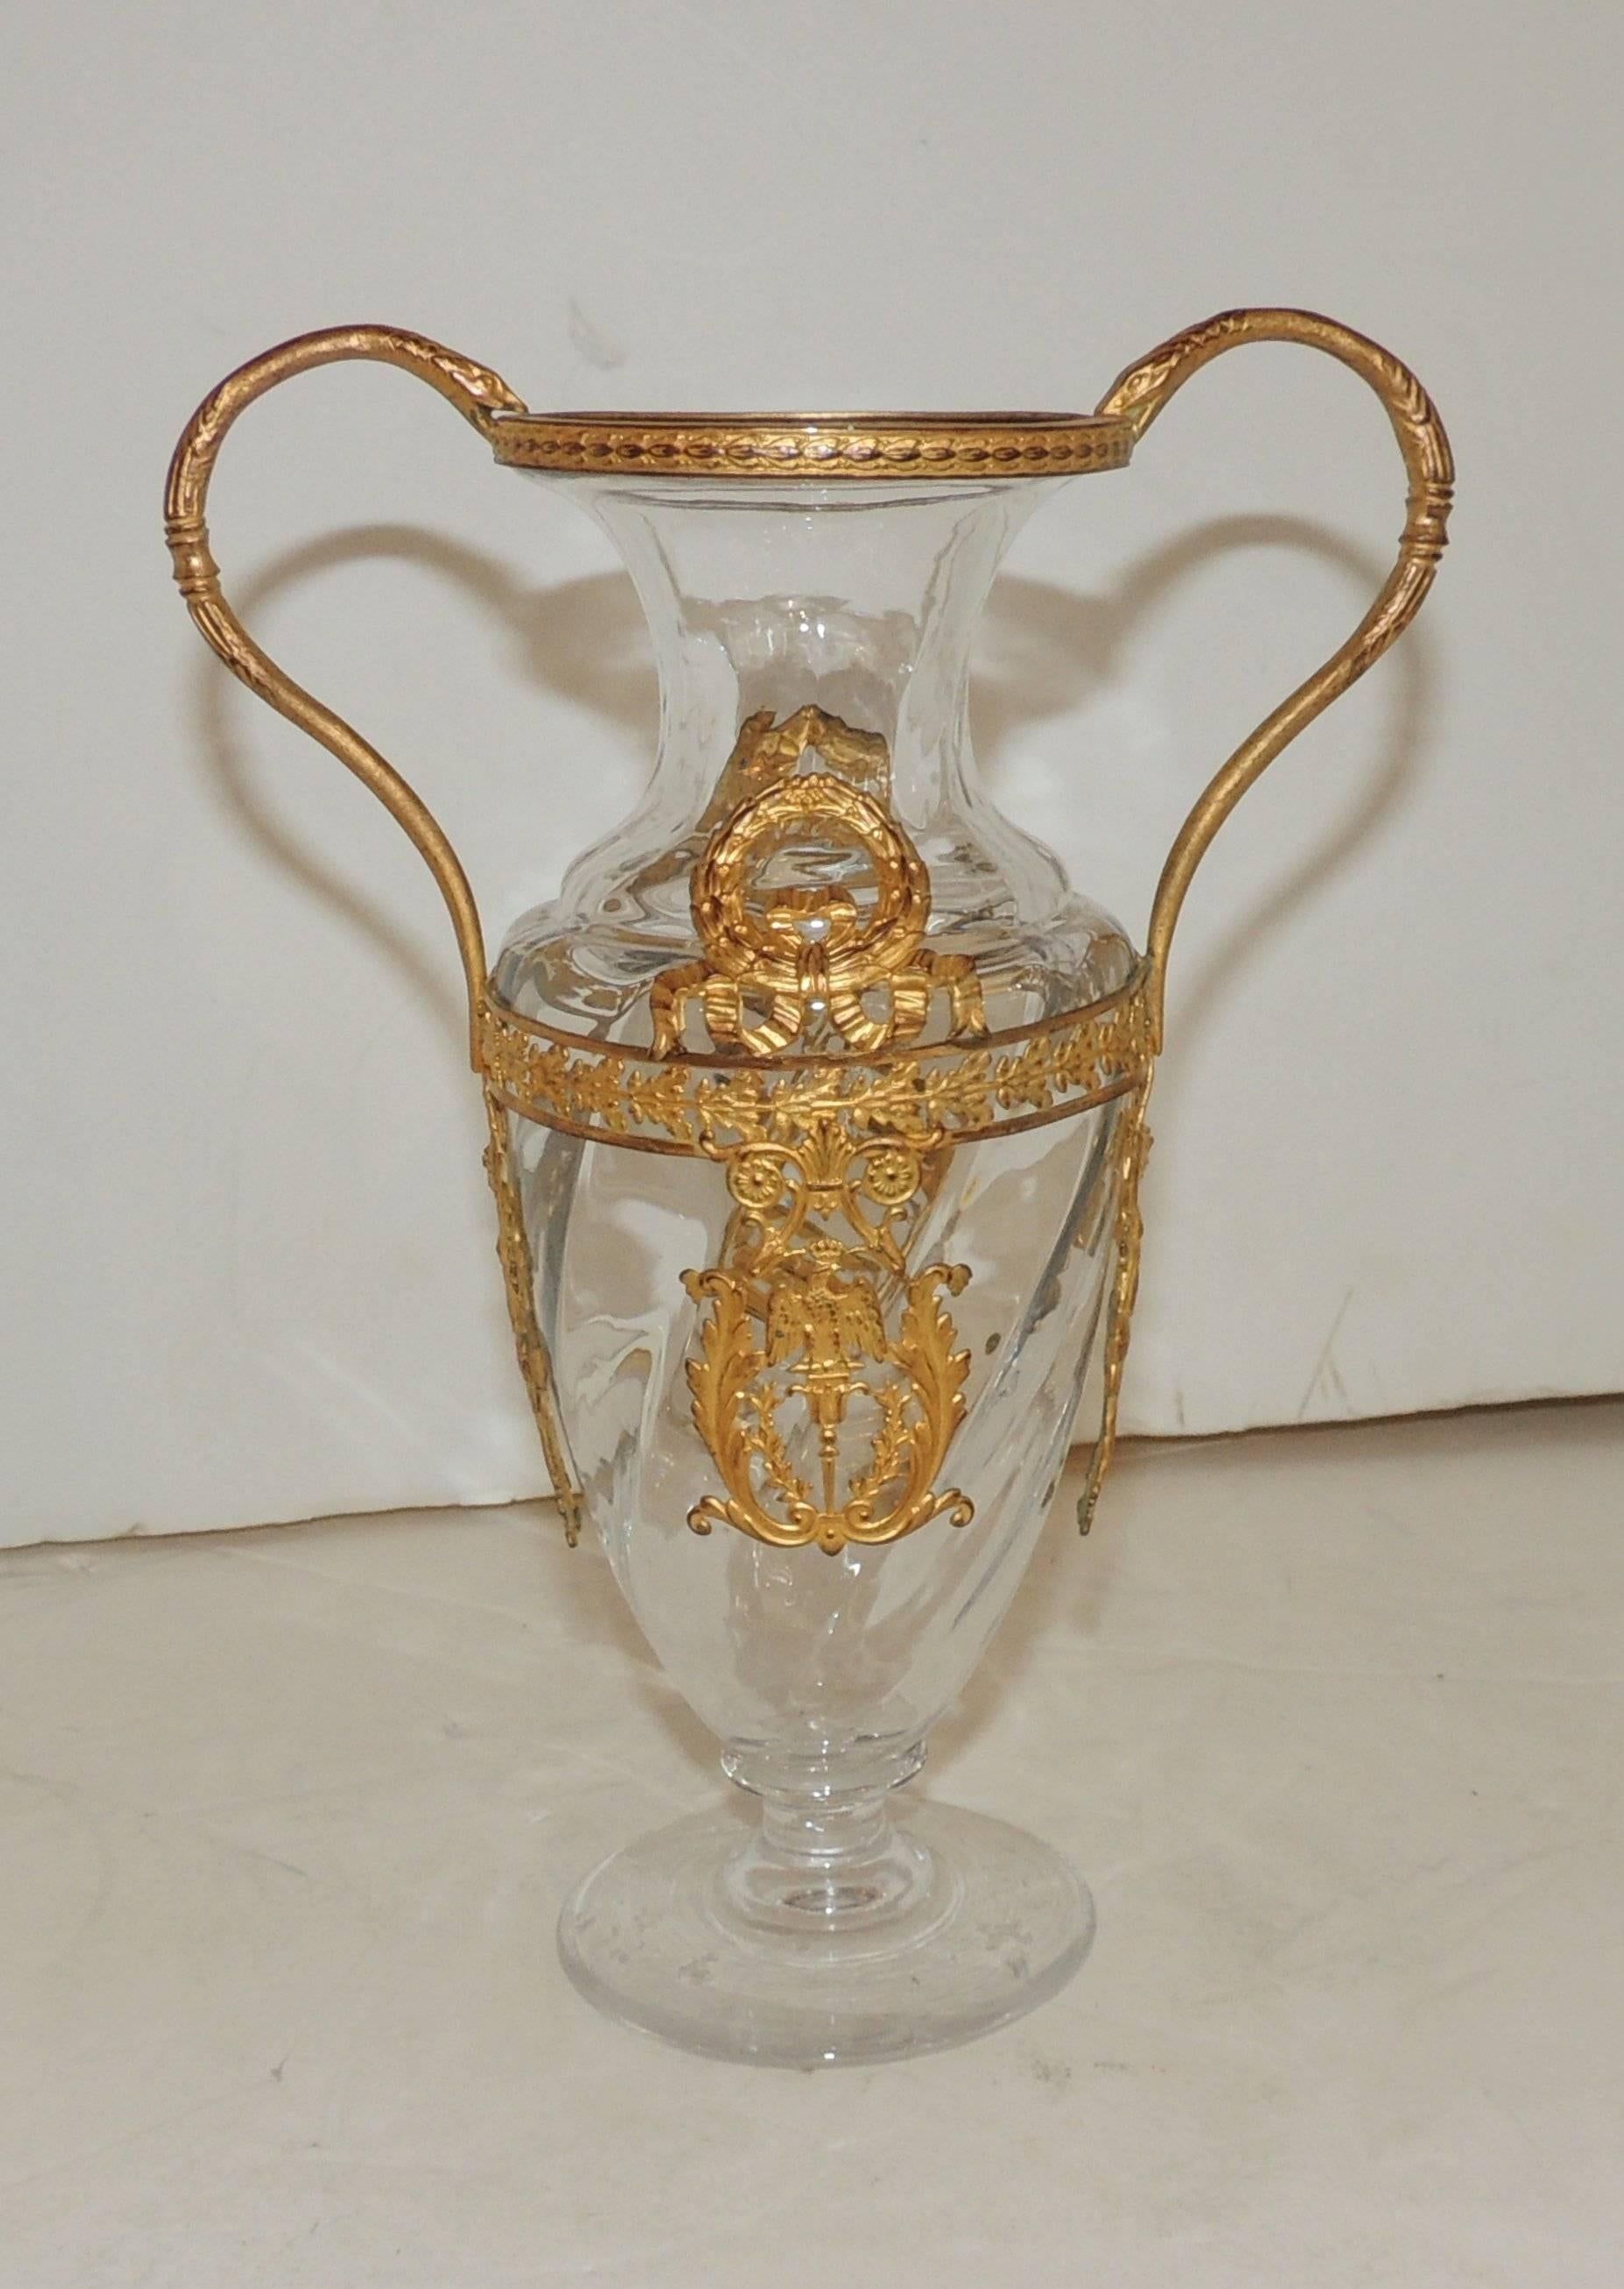 Belle Époque Wonderful French Bronze Ormolu-Mounted Crystal Floral and Ribbon Fluted Vase